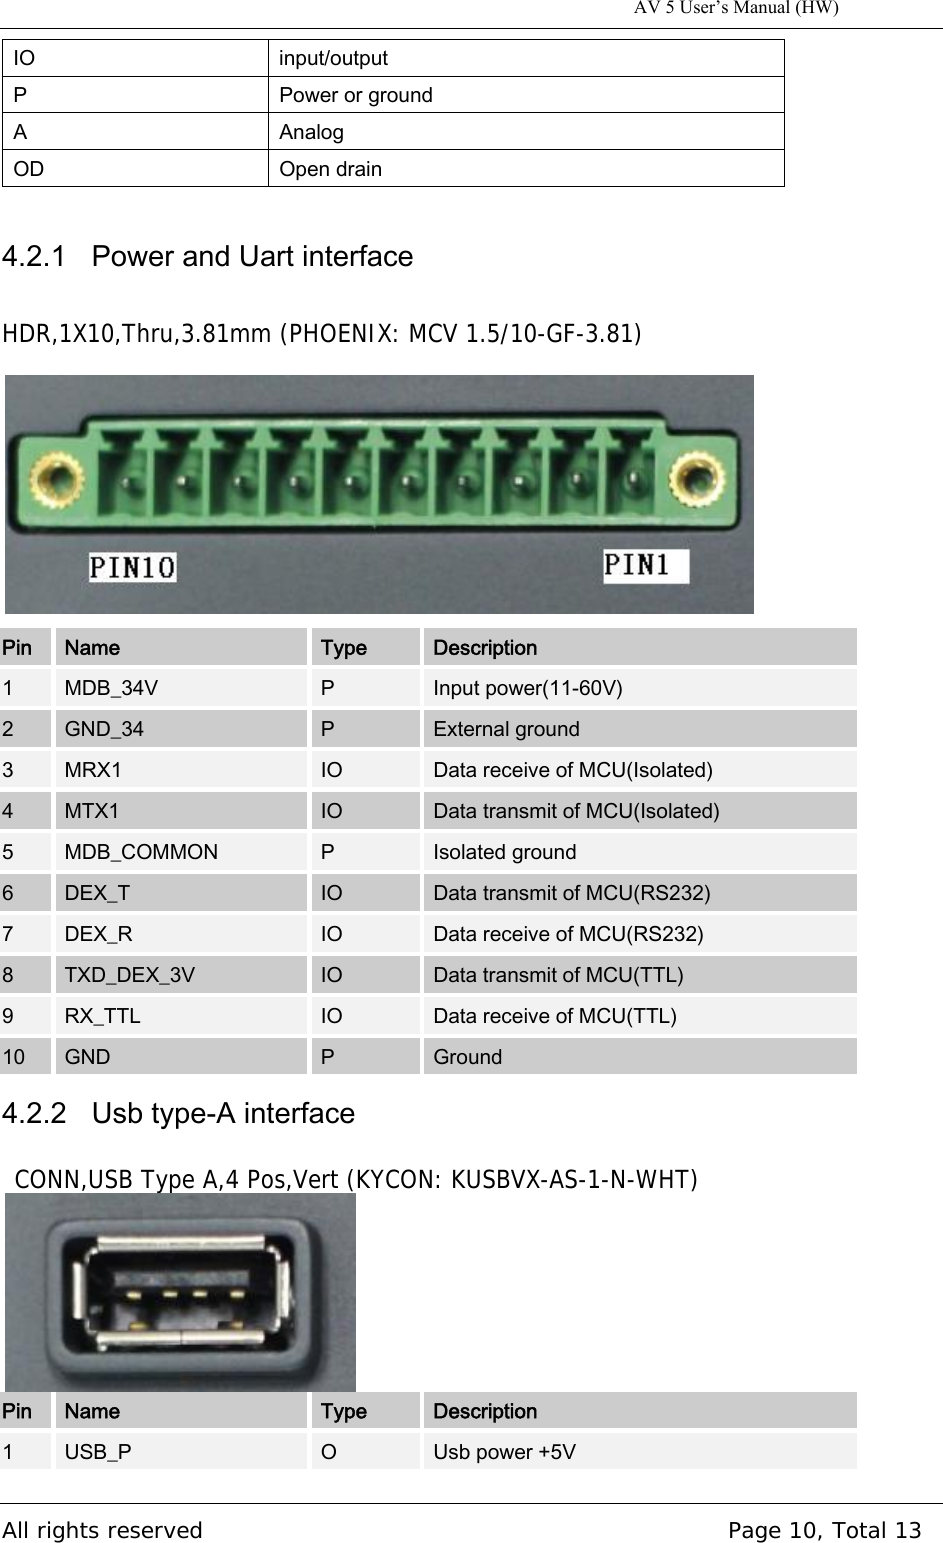 All rights reserved    Page 10, Total 13 IO  input/output P  Power or ground A  Analog OD  Open drain 4.2.1   Power and Uart interface HDR,1X10,Thru,3.81mm (PHOENIX: MCV 1.5/10-GF-3.81) Pin  Name  Type  Description 1  MDB_34V  P  Input power(11-60V) 2  GND_34  P  External ground 3  MRX1  IO  Data receive of MCU(Isolated) 4  MTX1  IO  Data transmit of MCU(Isolated) 5  MDB_COMMON  P  Isolated ground 6  DEX_T  IO  Data transmit of MCU(RS232) 7  DEX_R  IO  Data receive of MCU(RS232) 8  TXD_DEX_3V  IO  Data transmit of MCU(TTL) 9  RX_TTL  IO  Data receive of MCU(TTL) 10  GND  P  Ground 4.2.2   Usb type-A interface CONN,USB Type A,4 Pos,Vert (KYCON: KUSBVX-AS-1-N-WHT) Pin  Name  Type  Description 1  USB_P  O  Usb power +5V AV 5 User’s Manual (HW) 